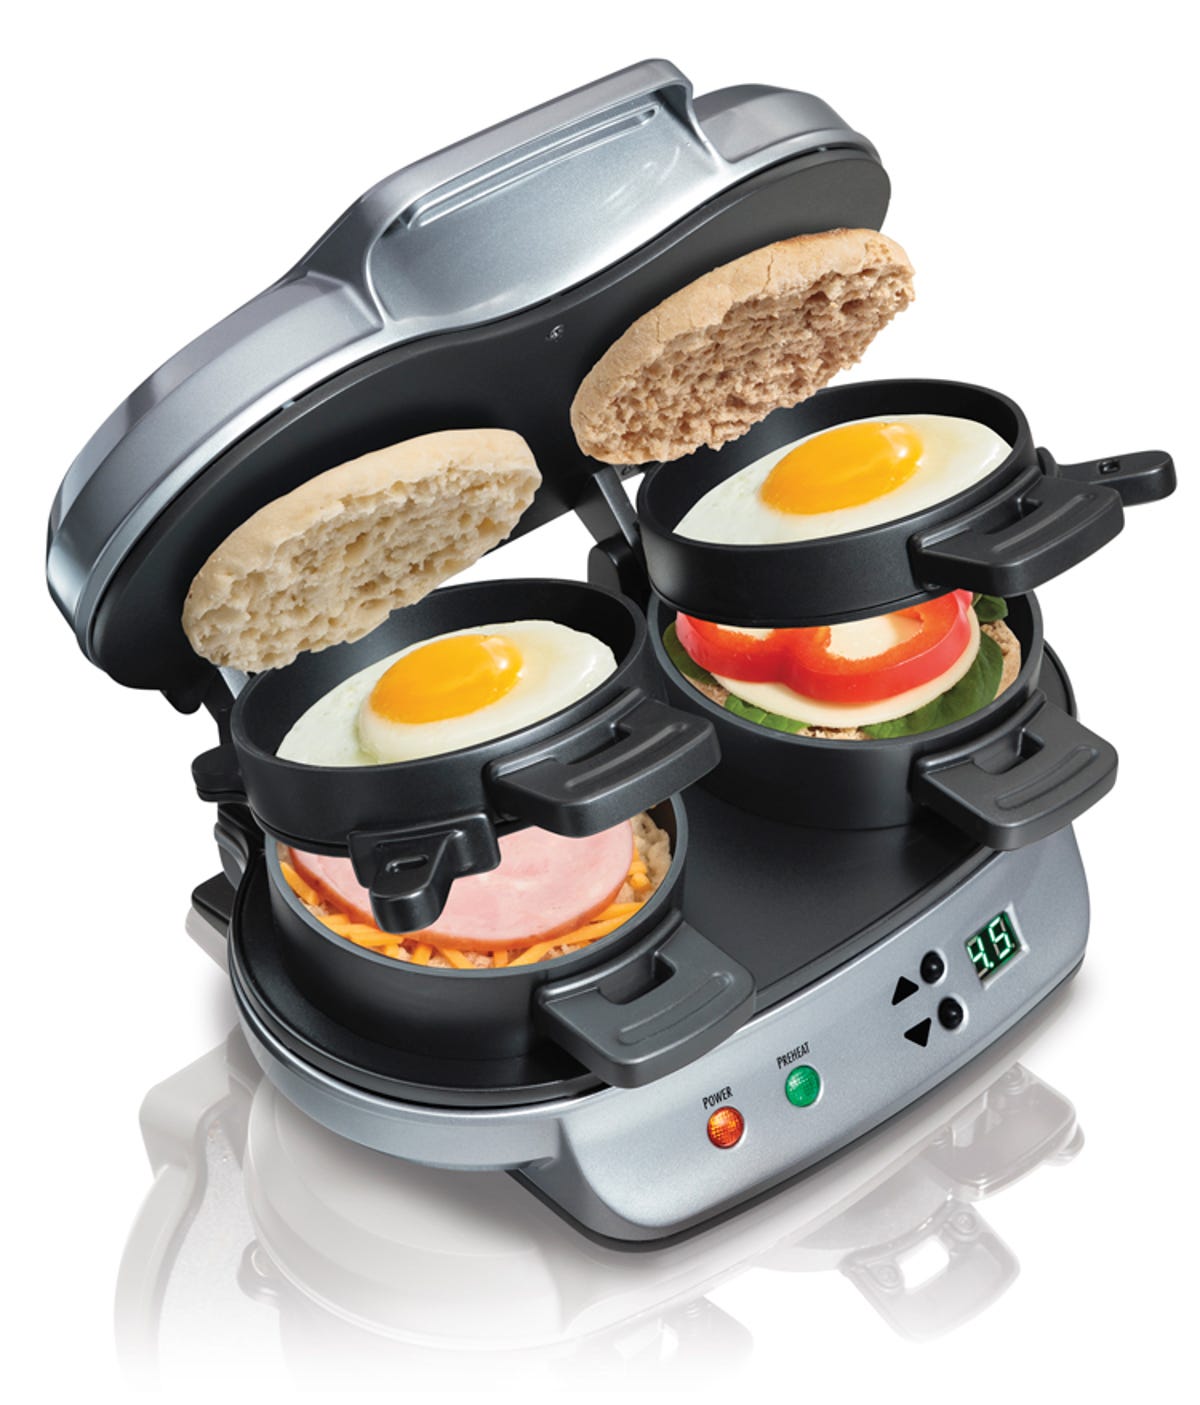 Remember that sharing is caring when using the Hamilton Beach 25490 Dual Breakfast Sandwich Maker.